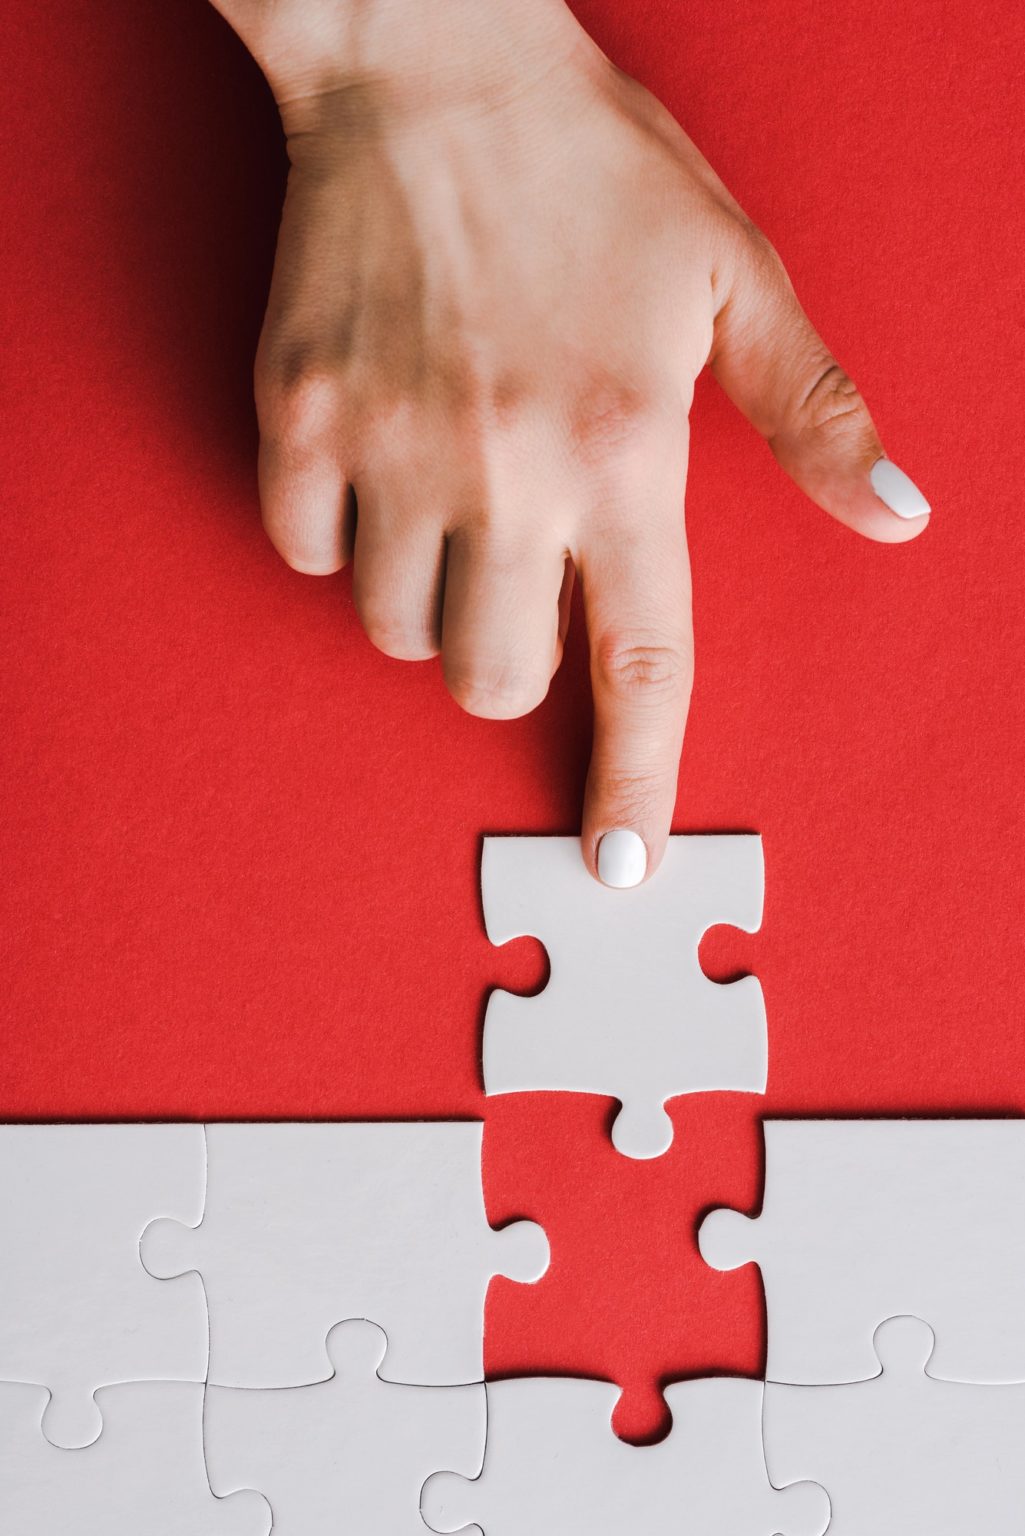 top view of woman pointing with finger at jigsaw near connected white puzzle pieces on red